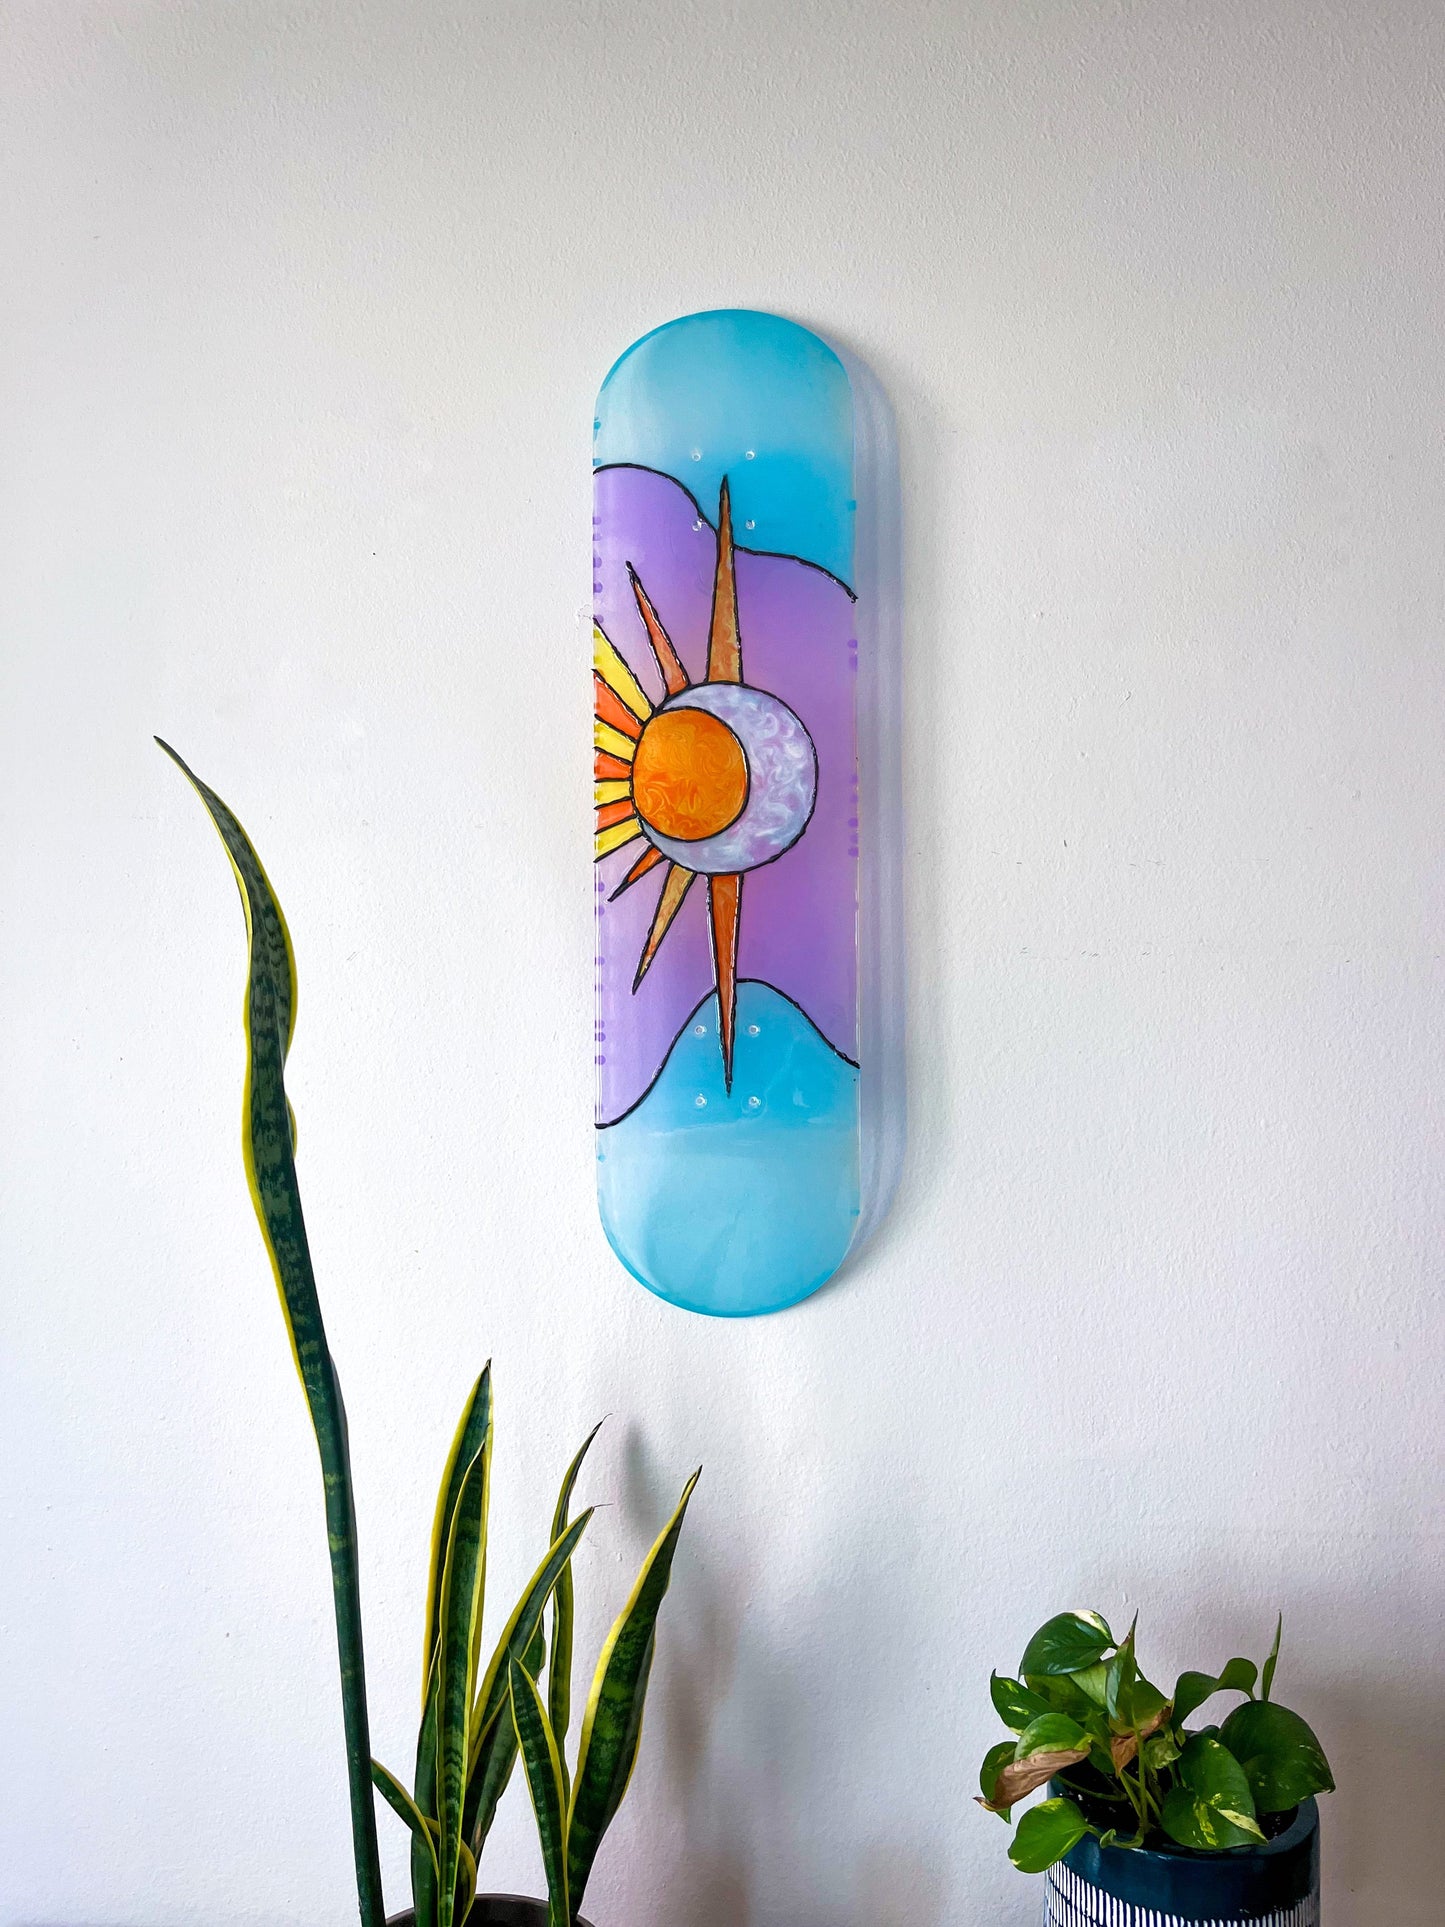 Sun and Moon stained glass resin skateboard art hanging on wall casting colorful shadow.